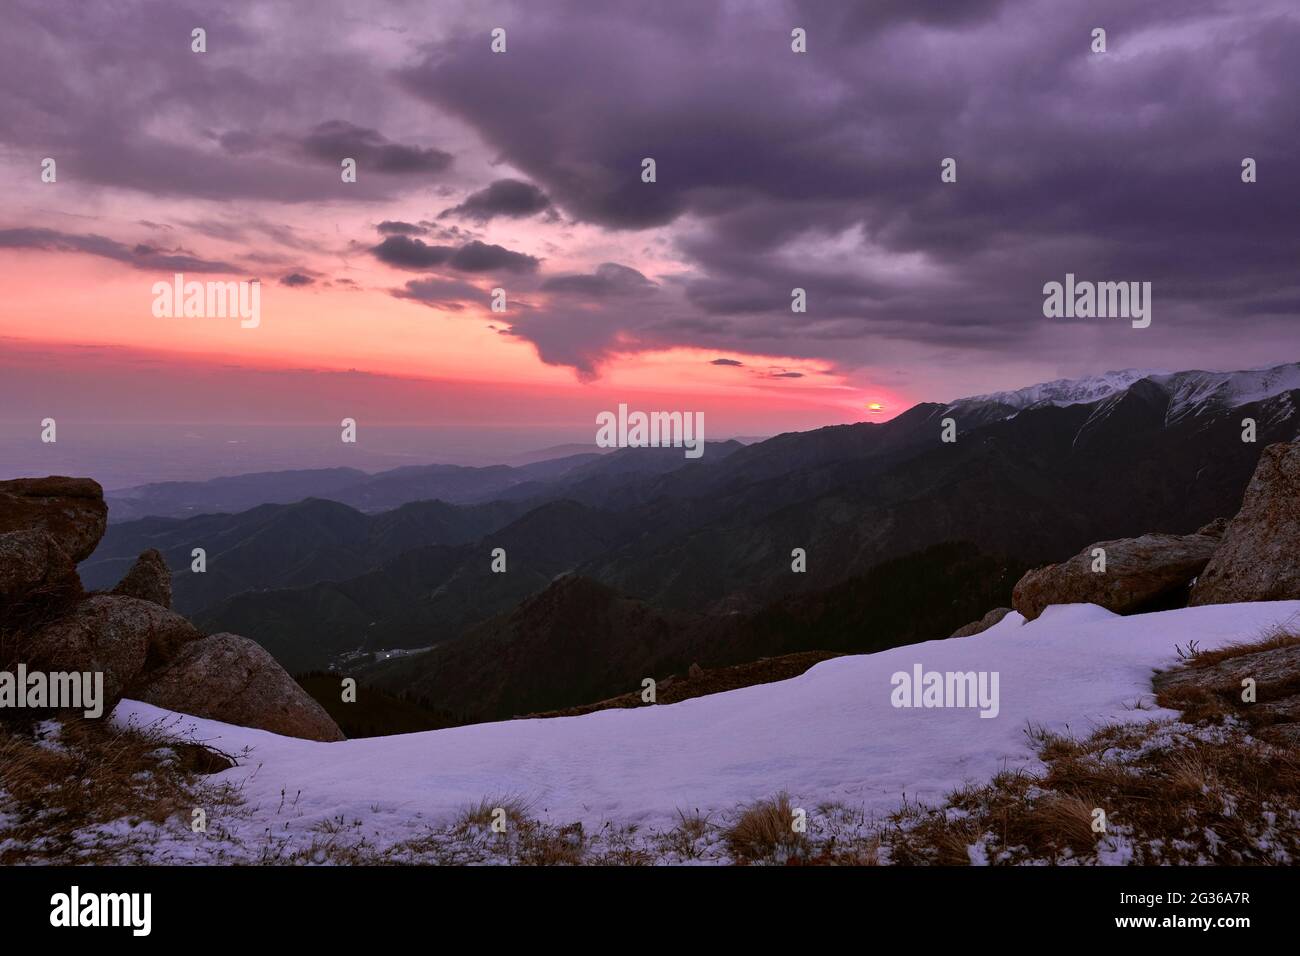 Magical atmosphere of the sunrise over the mountain ridges Stock Photo